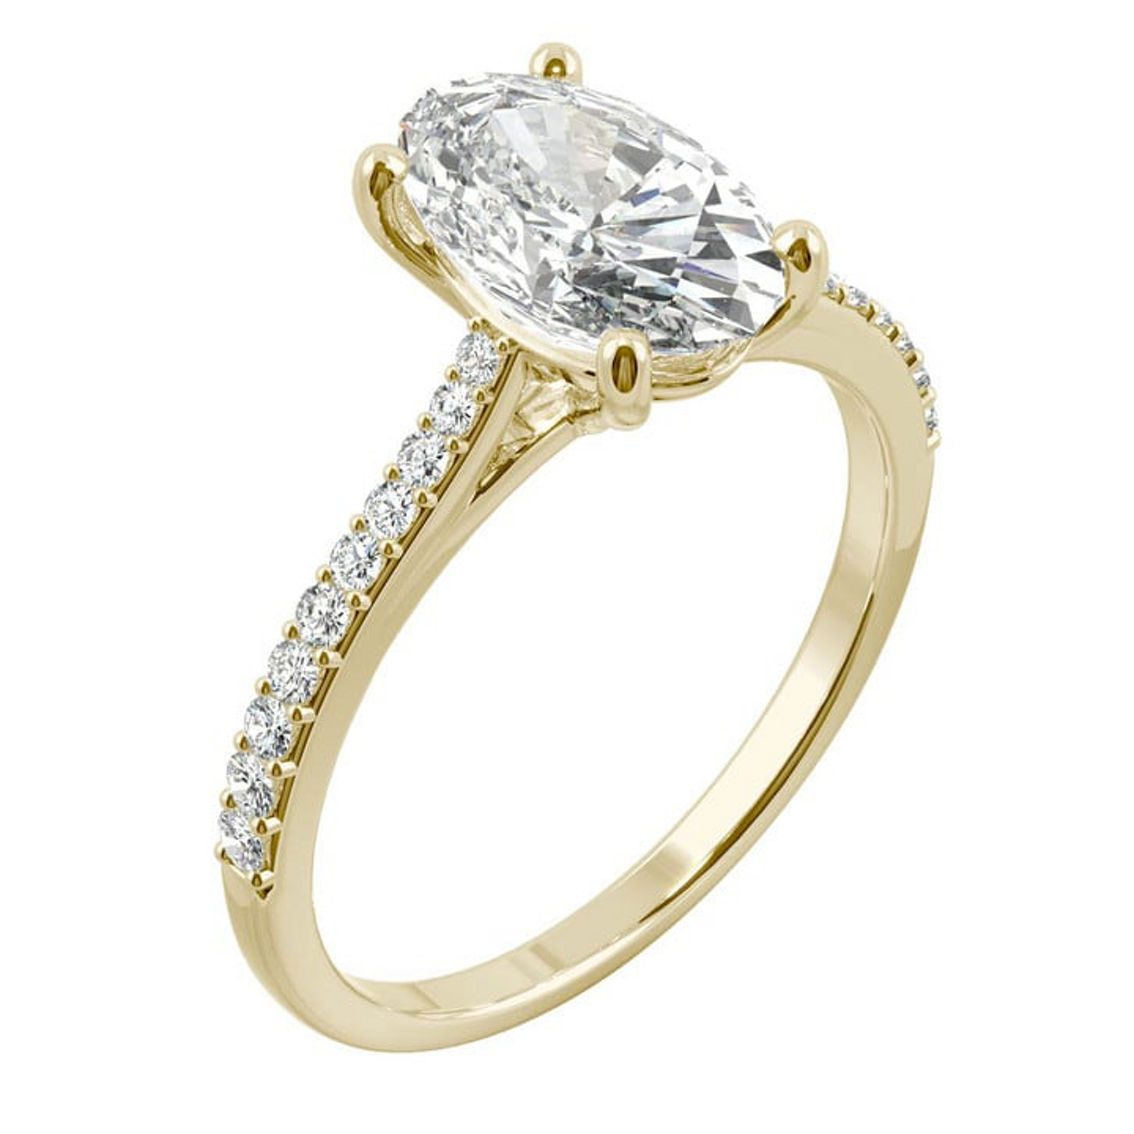 Charles & Colvard 2.49cttw Moissanite Oval Engagement Ring in 14k Yellow Gold - Image 2 of 5